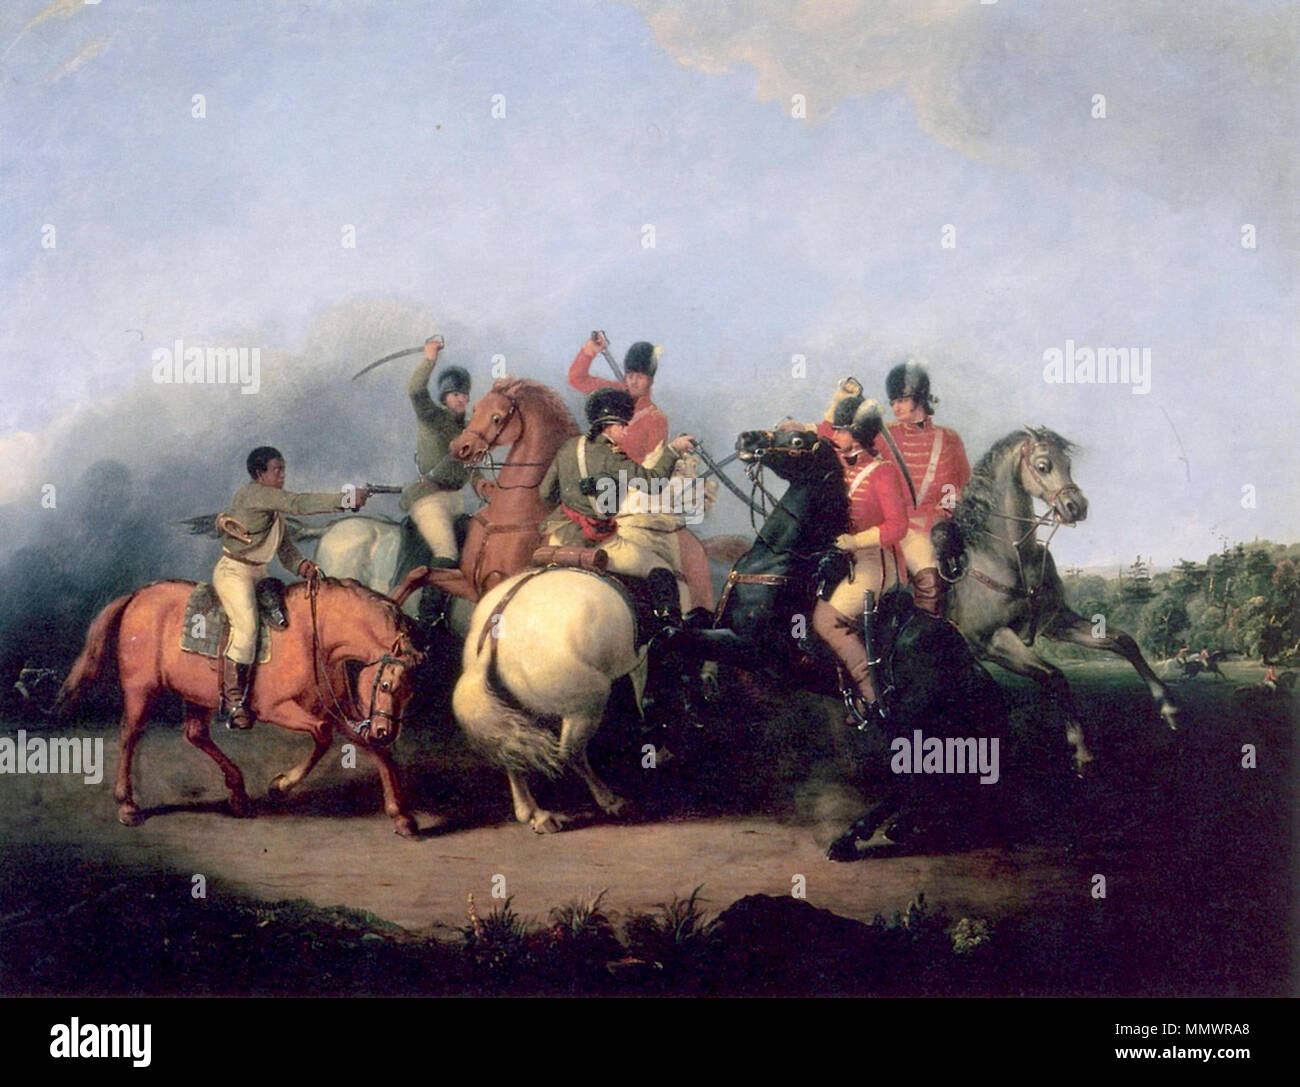 . English: The Battle of Cowpens, painted by William Ranney in 1845. The scene depicts an unnamed black soldier (left) firing his pistol and saving the life of Colonel William Washington (on white horse in center).  . 1845.   William Ranney  (1813–1857)     Alternative names William Tylee Ranney; William S. Ranney; wm ranney; william t. ranney; william Ranney  Description American painter  Date of birth/death 9 May 1813 18 November 1857  Location of birth/death Middletown Union City  Authority control  : Q8017370 VIAF:?62627907 ISNI:?0000 0000 6683 6266 ULAN:?500011660 LCCN:?nr92003145 GND:?12 Stock Photo